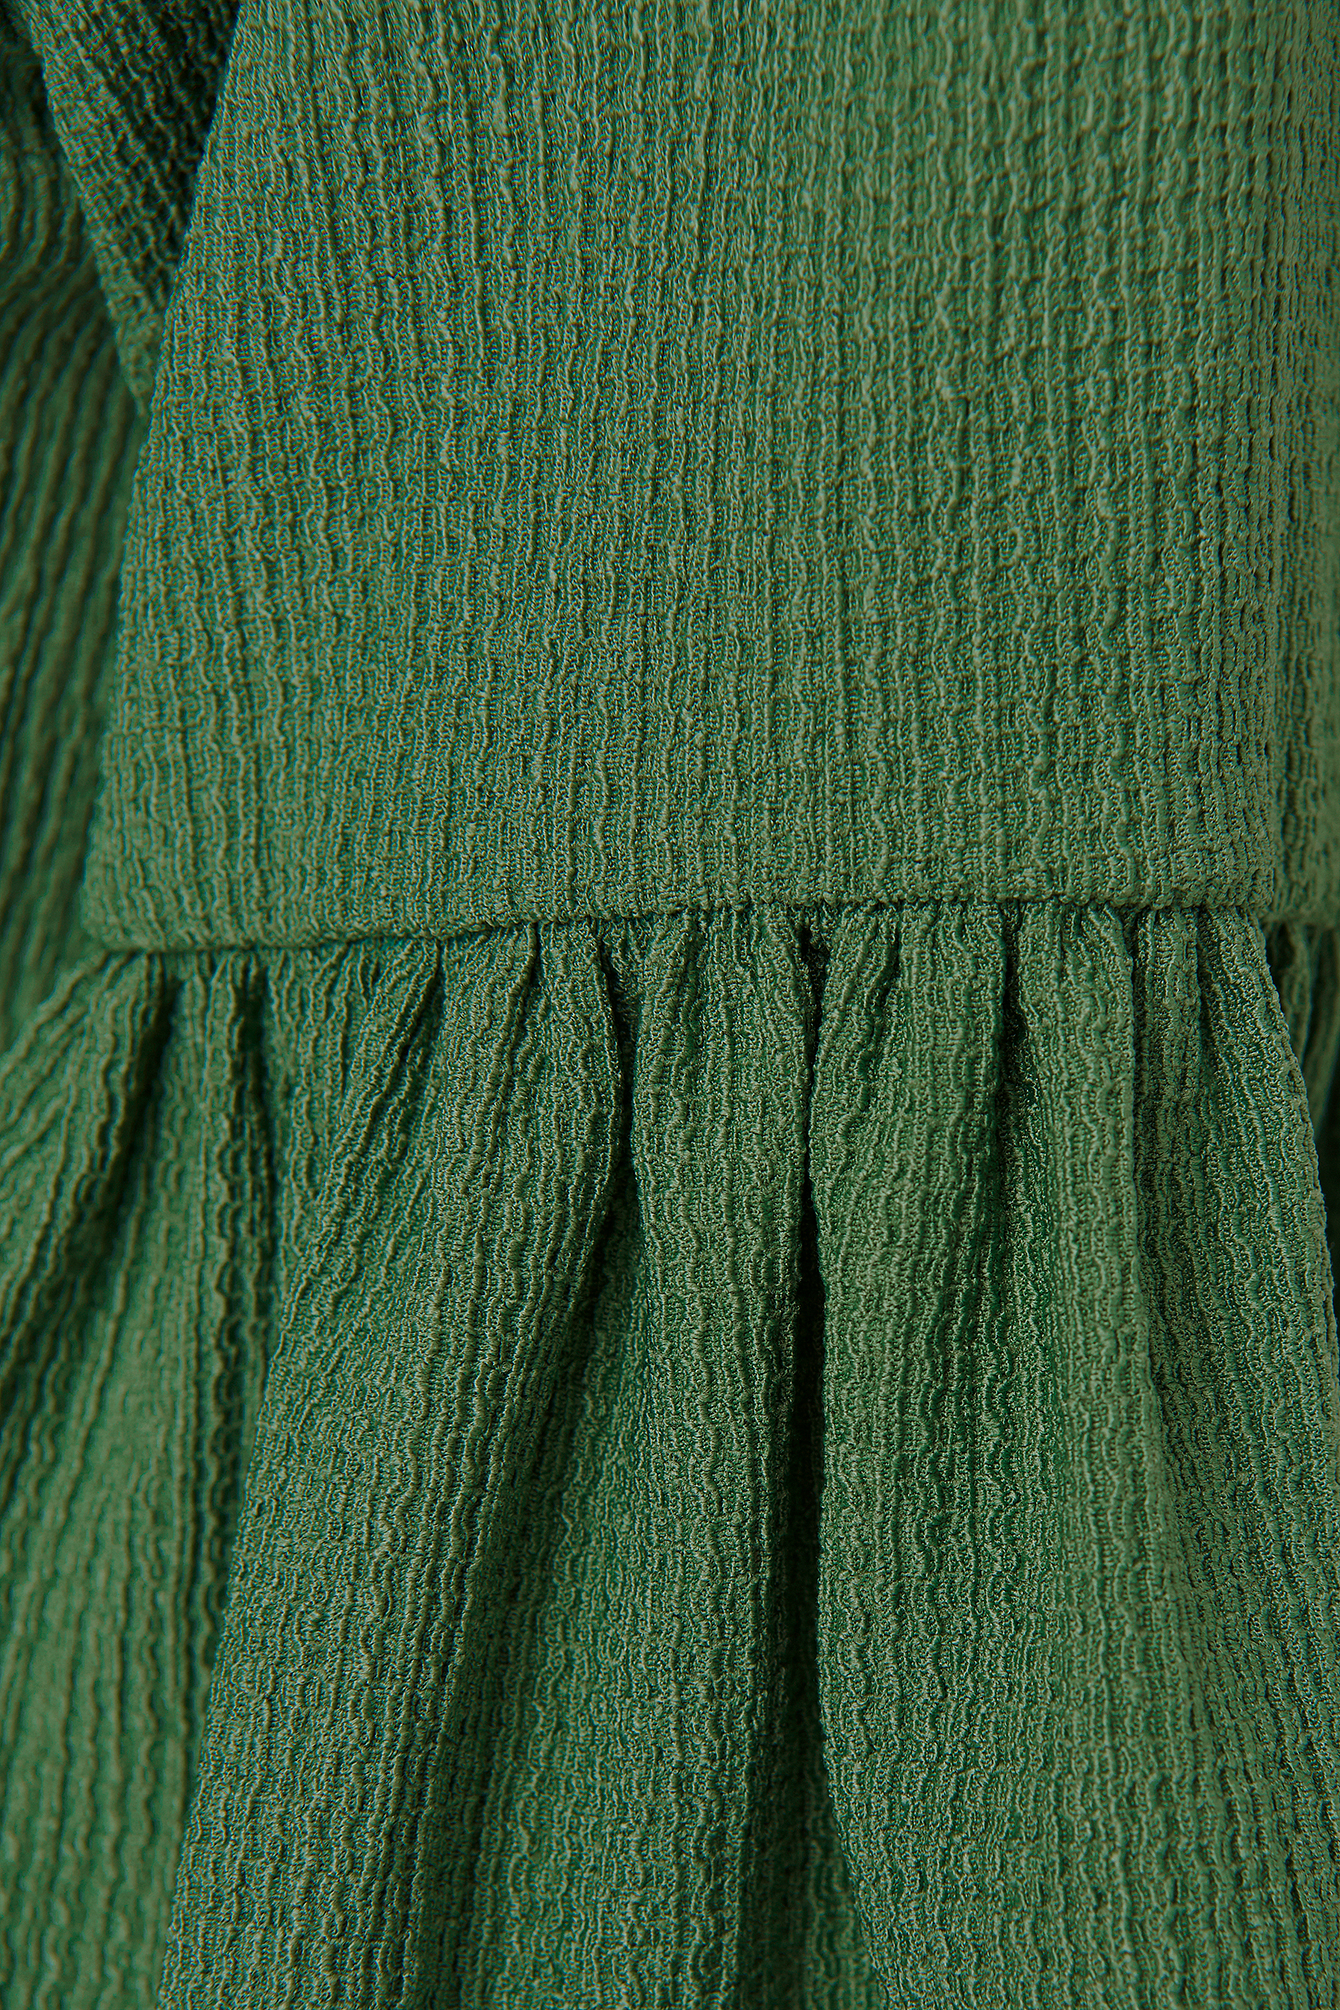 Green 3/4 Frill Sleeve Top